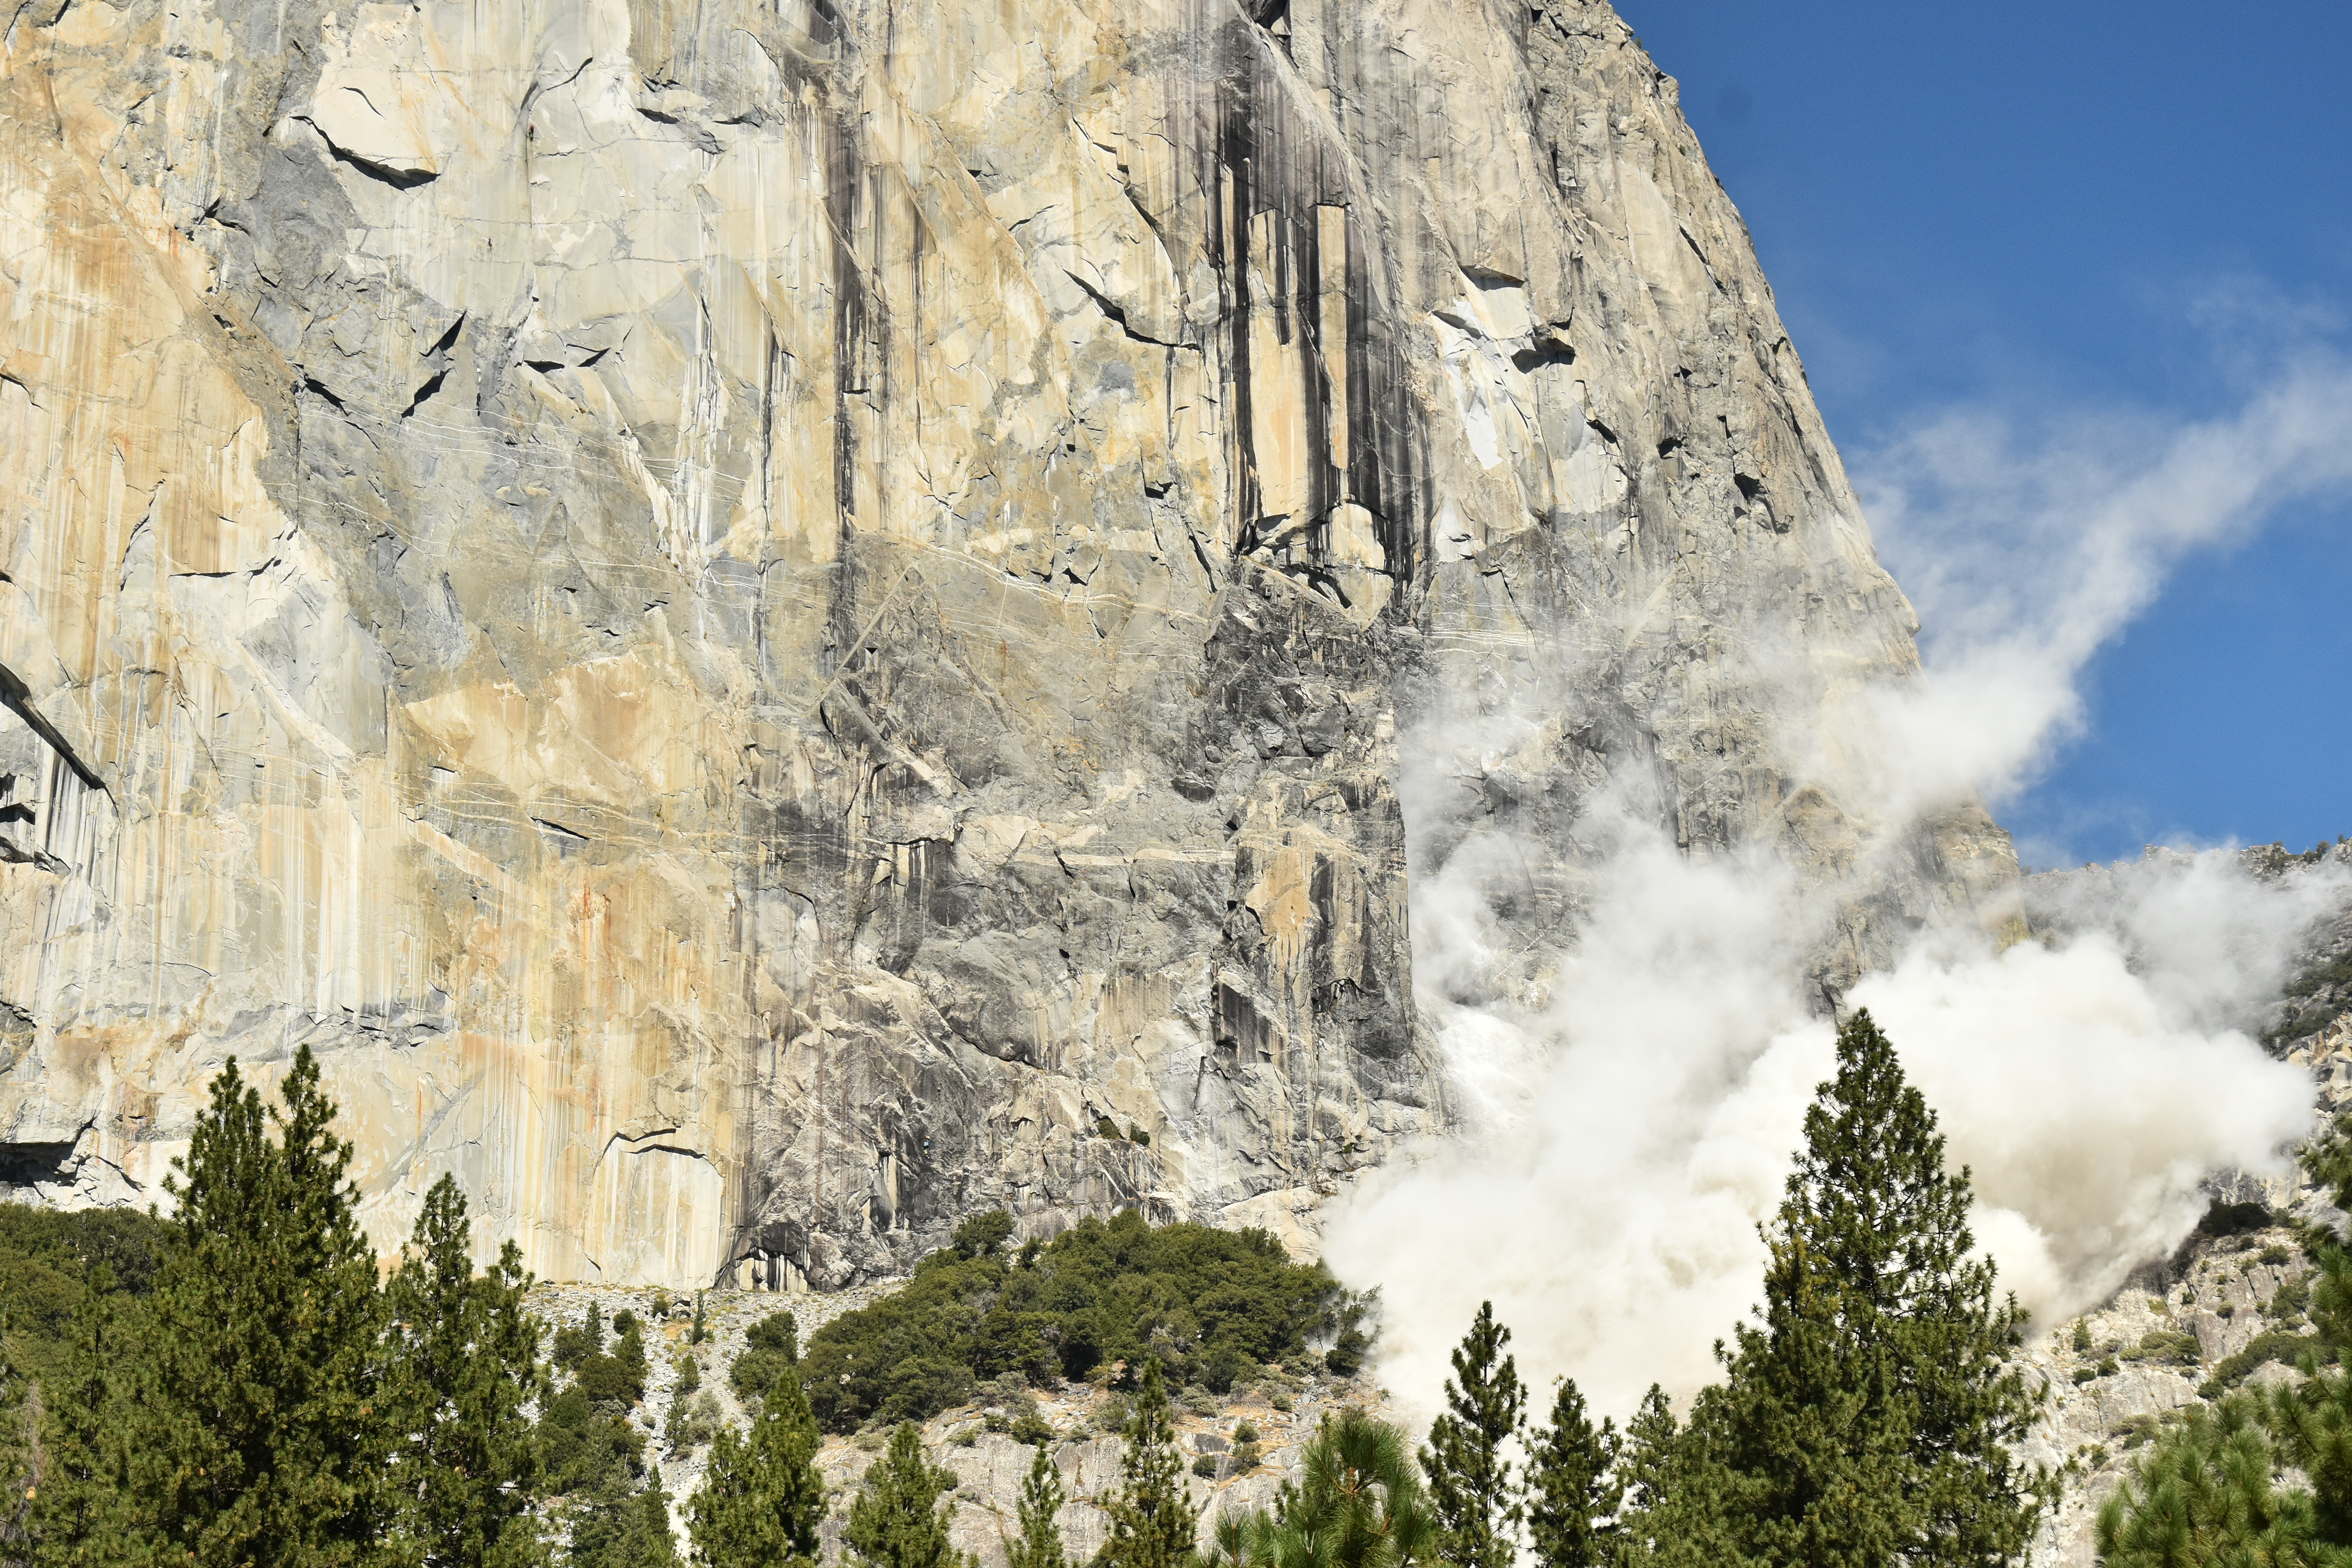 A huge plume of granite dust billows at the base of Yosemite's El Capitan where a massive series of rockfalls occurred the afternoon of September 27. A fresh, white rock scar where the event originated can be seen to the right of the black streaks. One person was killed and another injured. [Photo] Tom Evans